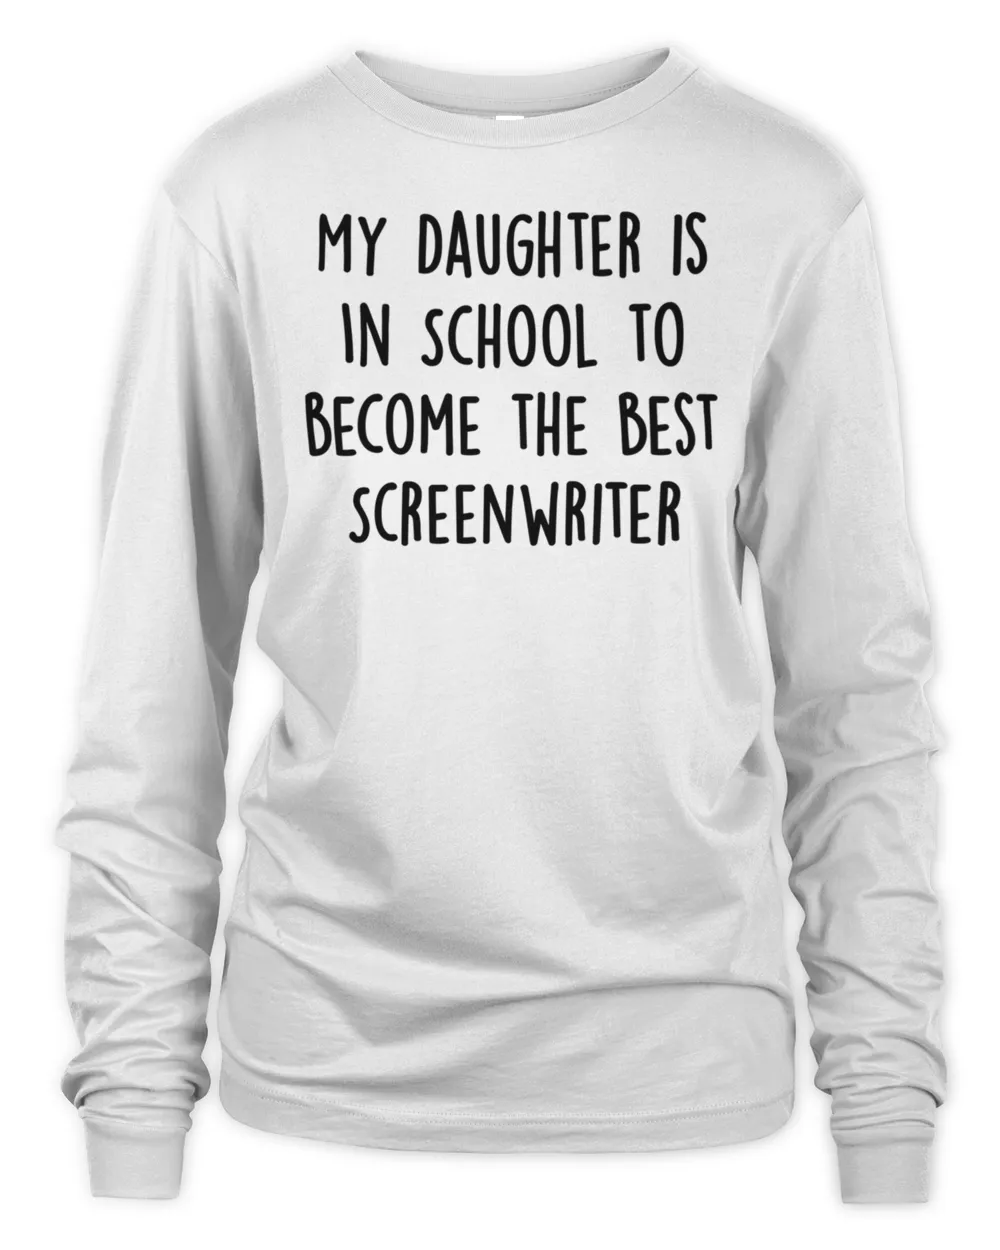 My Daughter Is in School To Become The Best Screenwriter T-Shirt